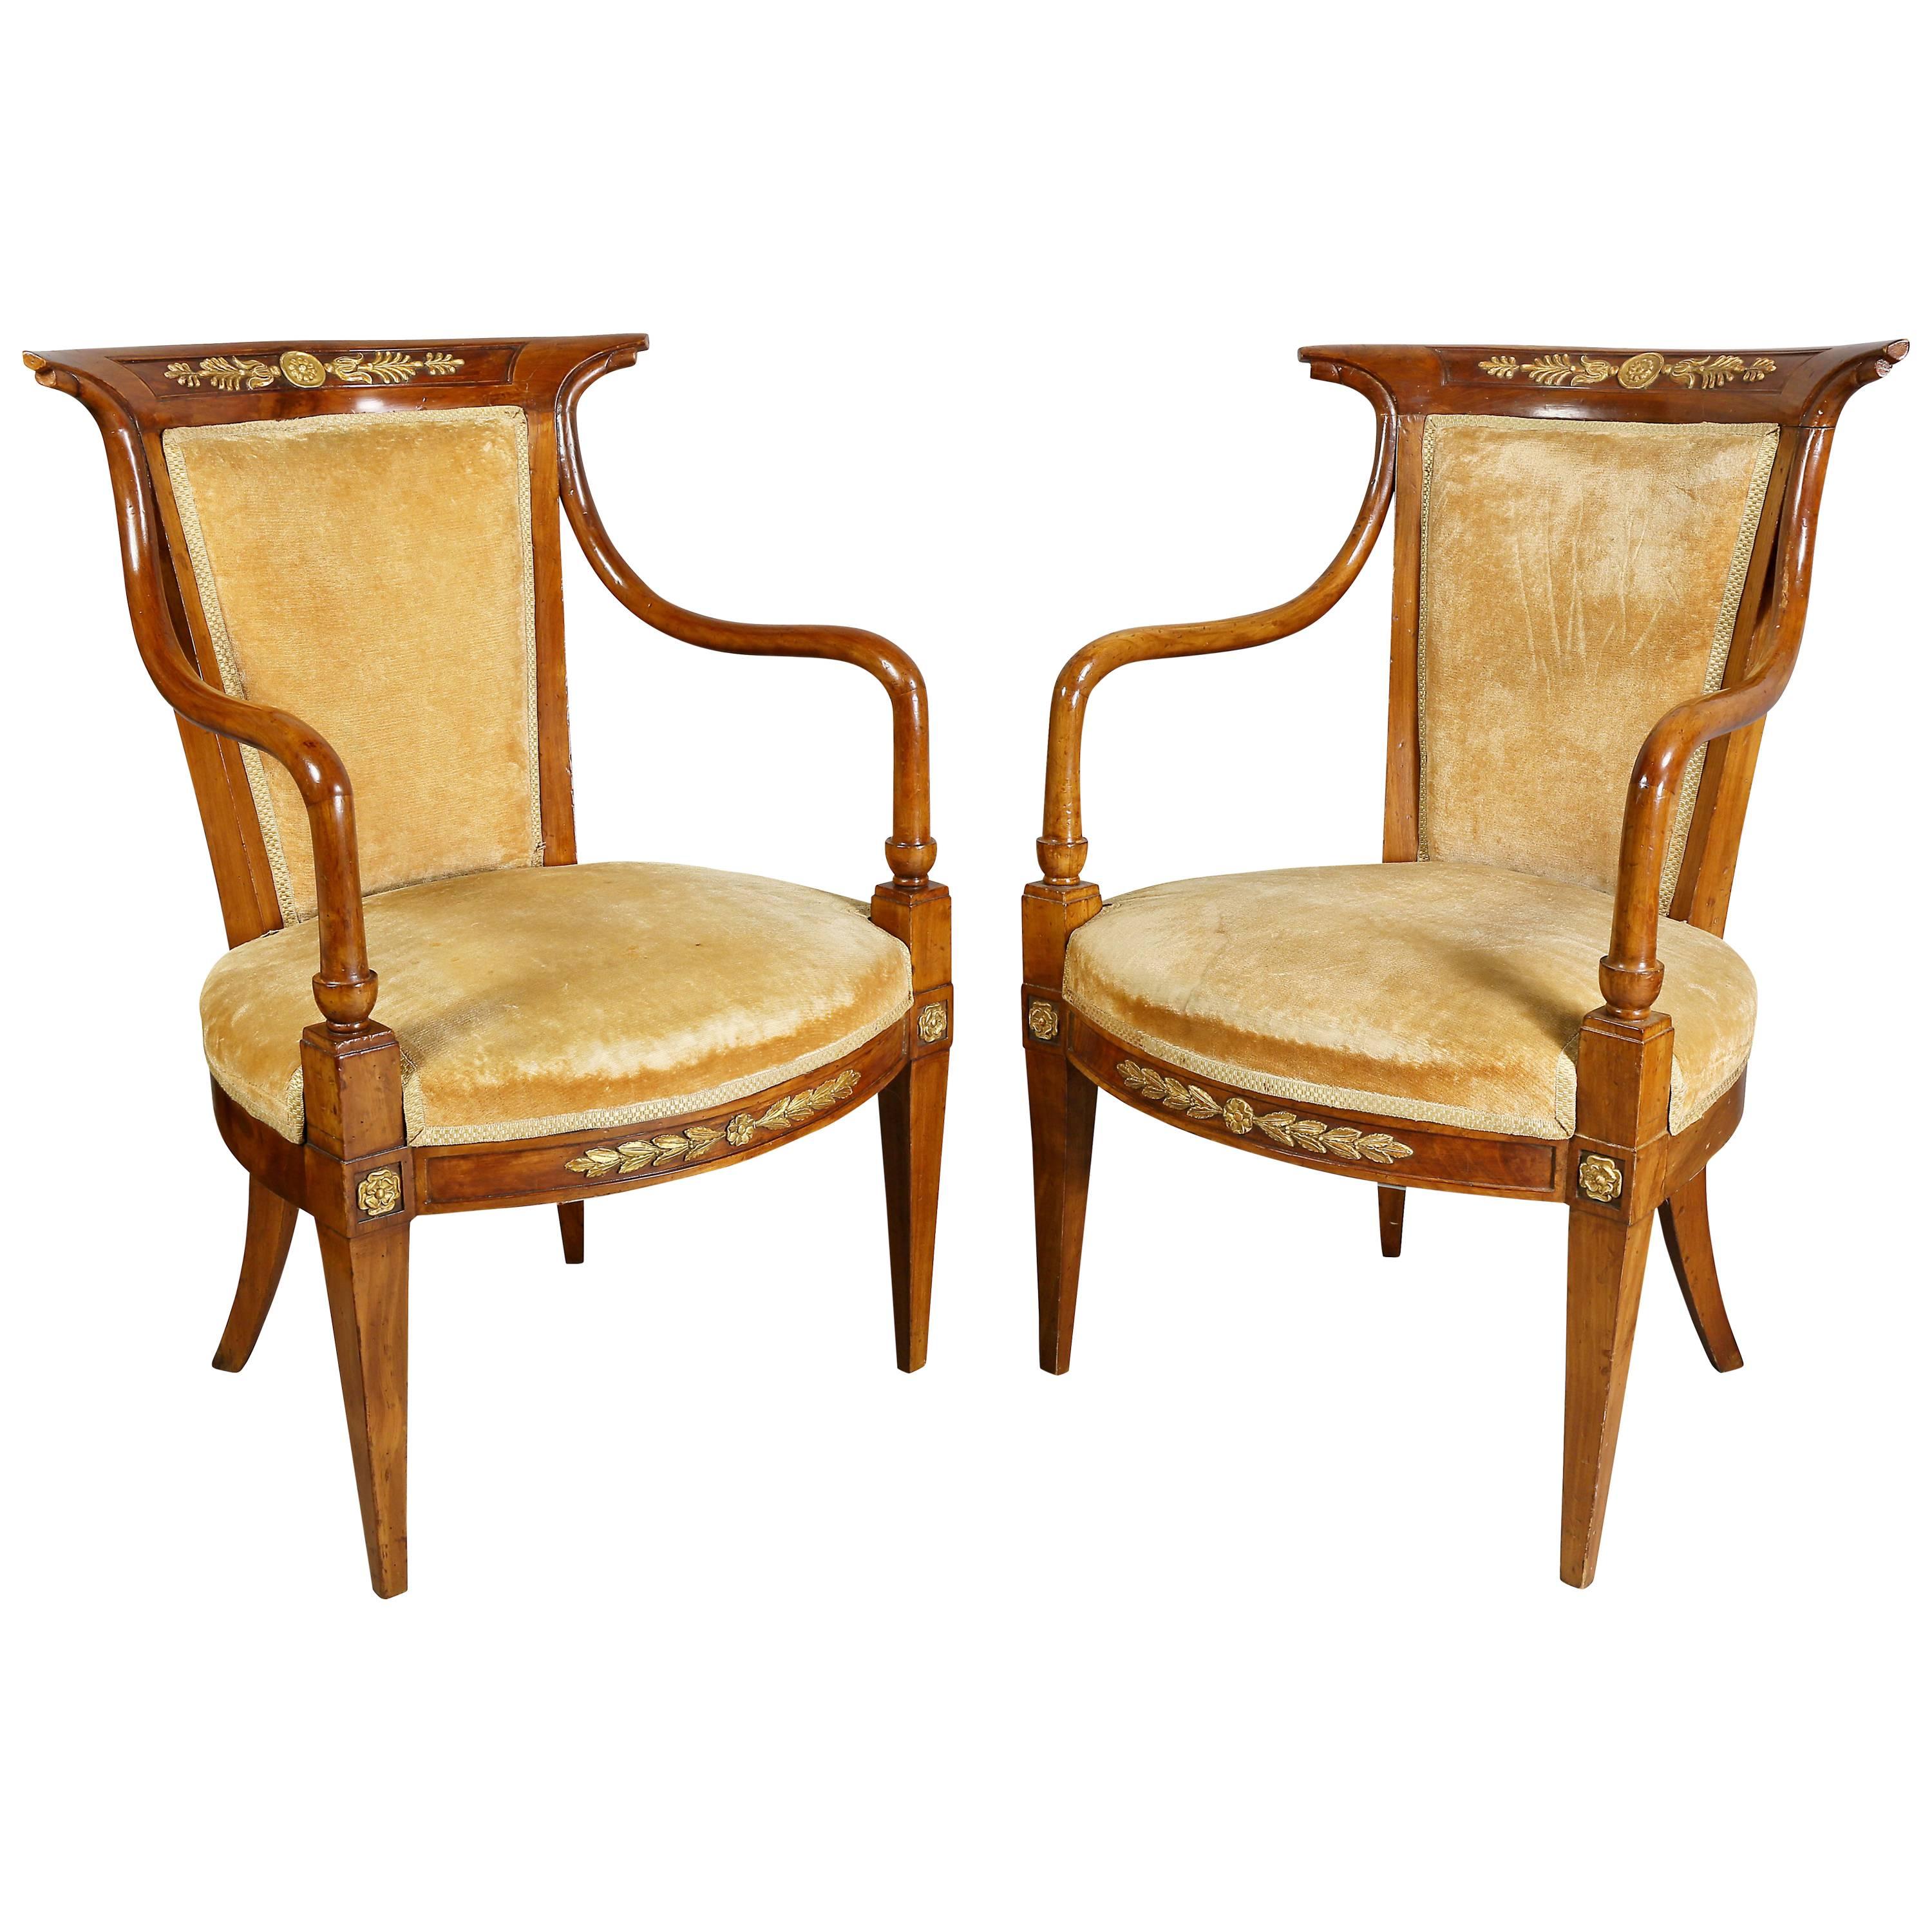 Pair of Italian Neoclassic Walnut and Giltwood Armchairs